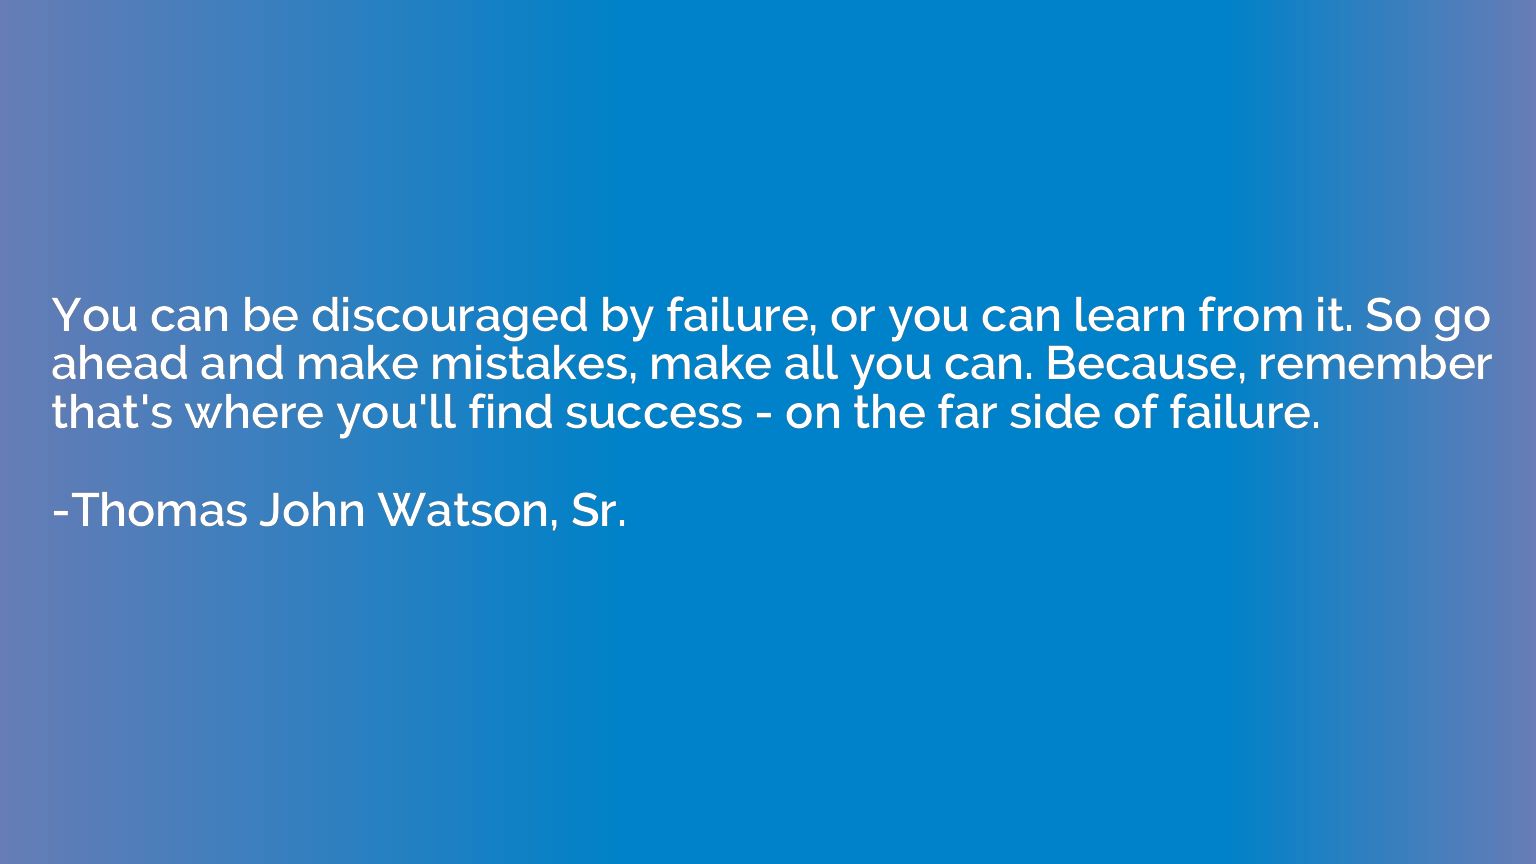 You can be discouraged by failure, or you can learn from it.